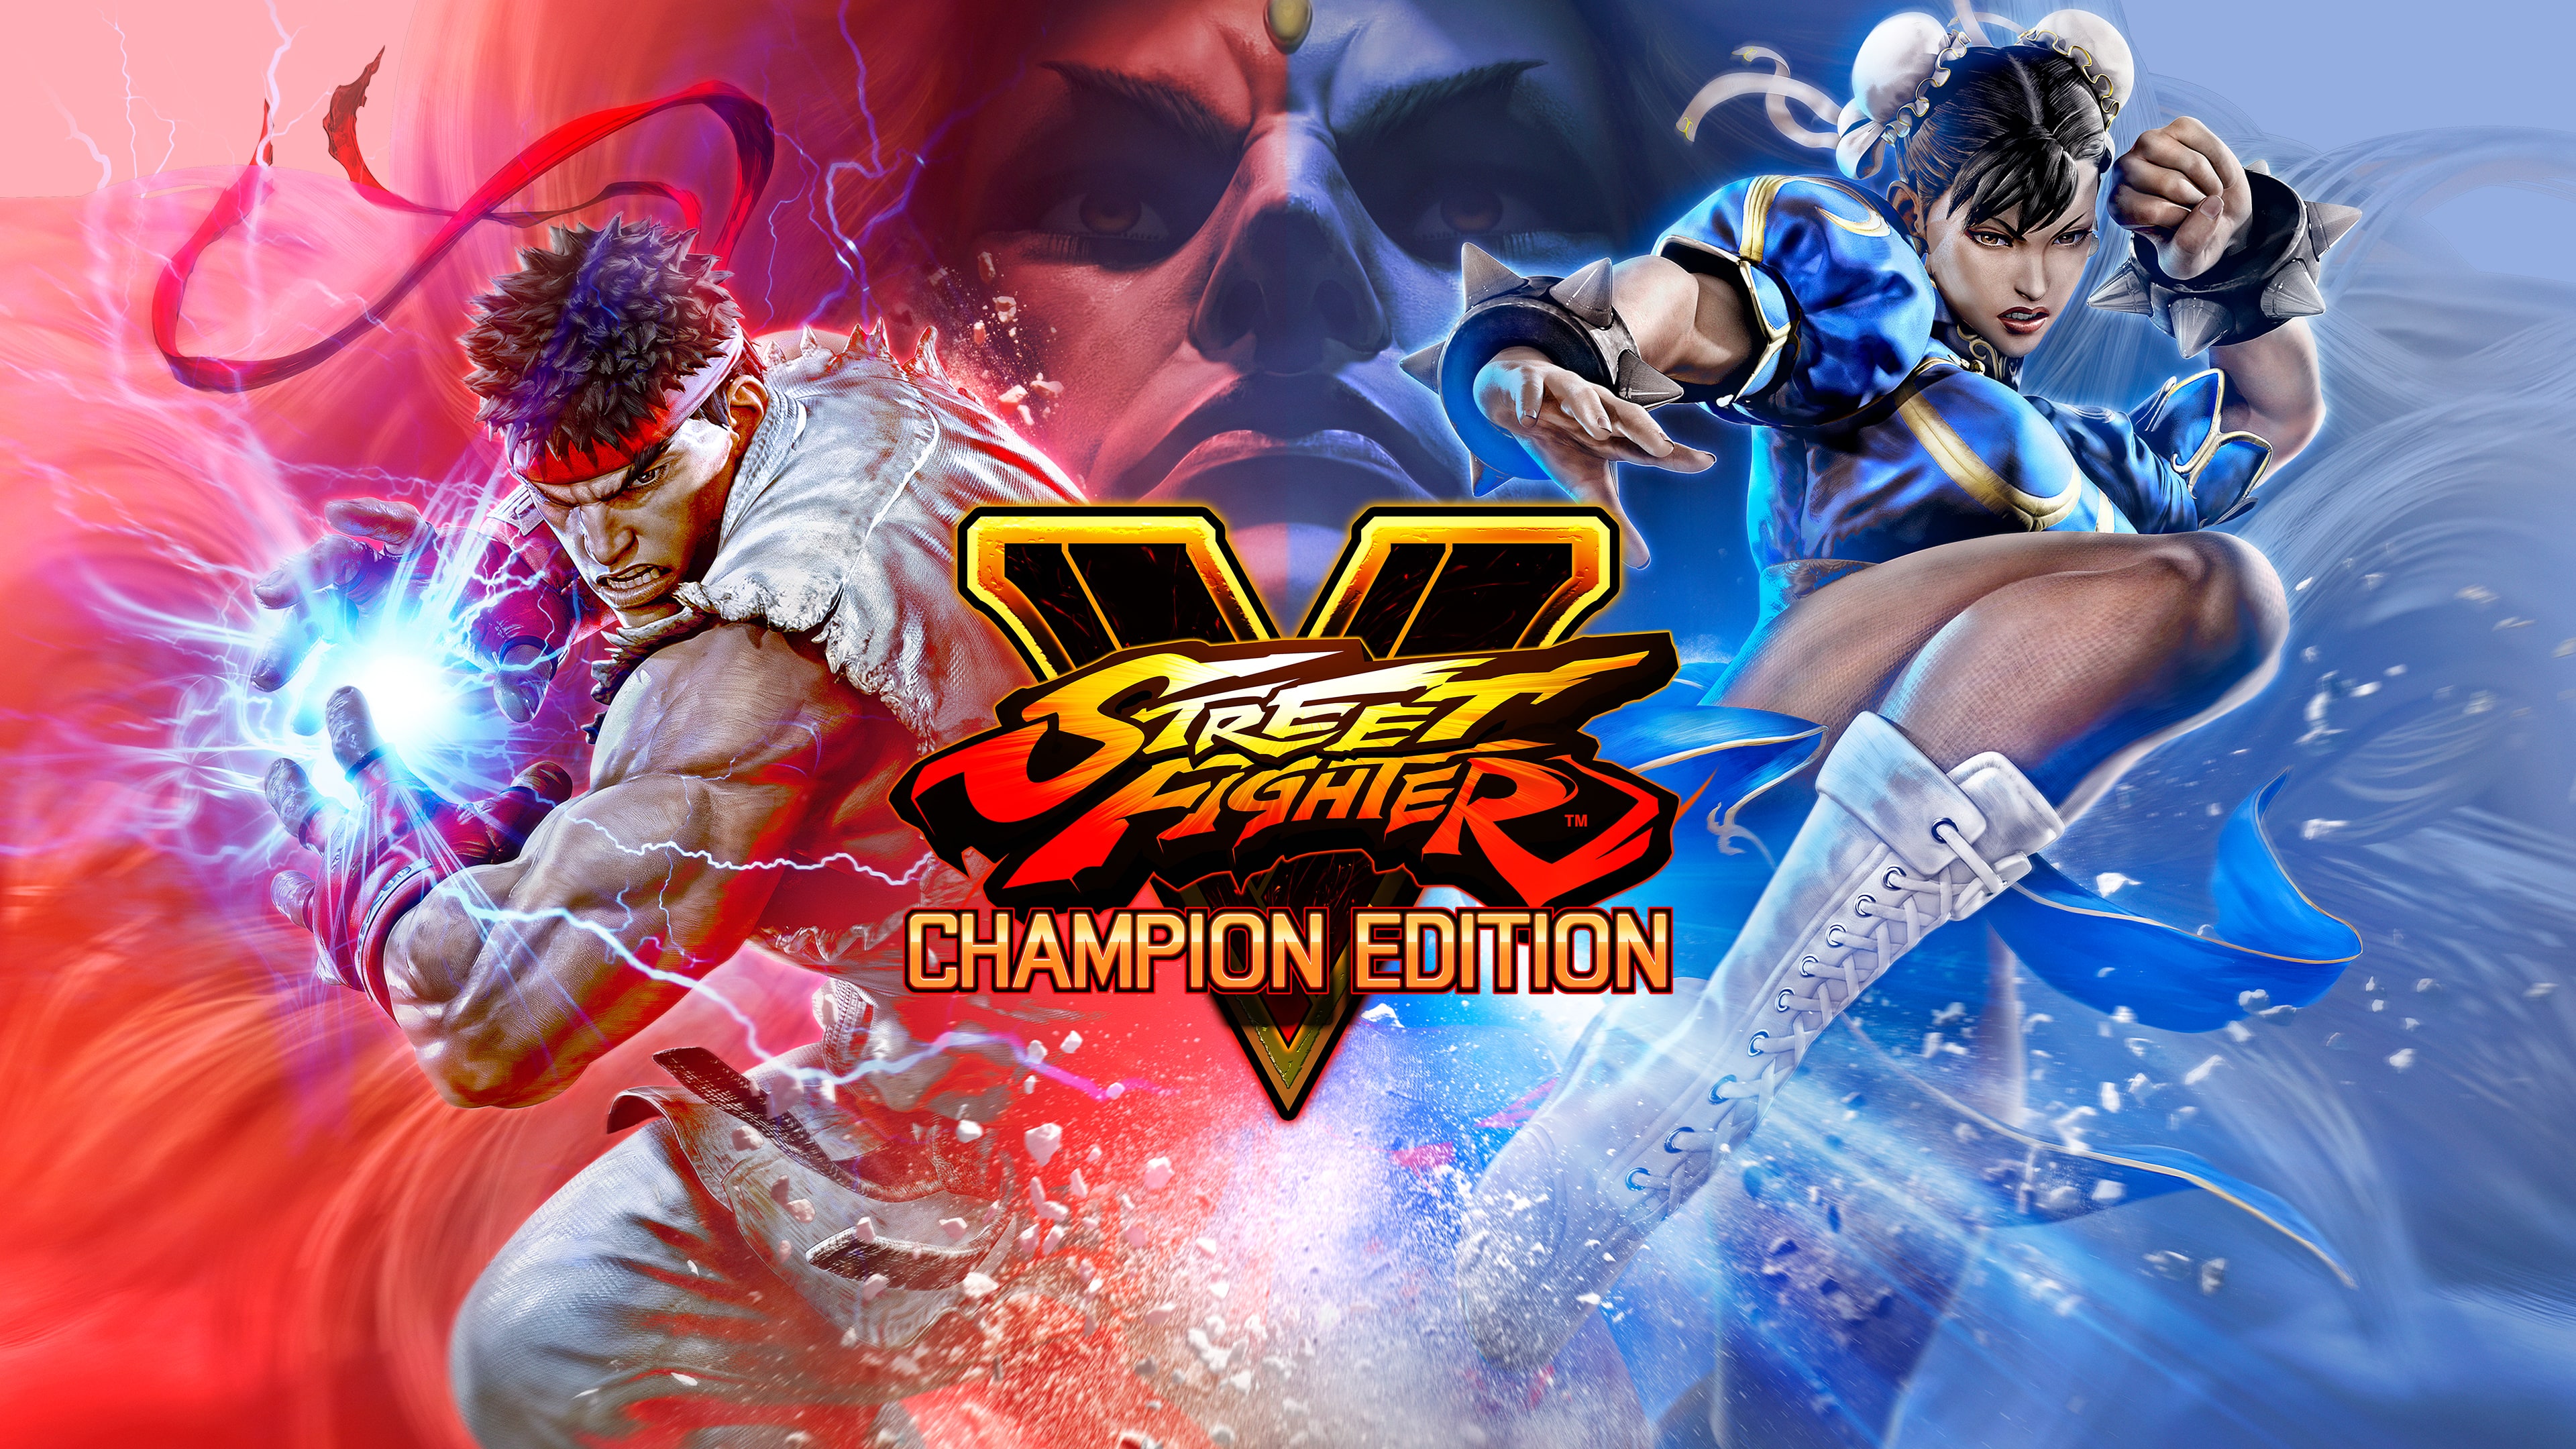 Street Fighter V Champion Edition All Character Pack Playstation 4 PS4  Games NEW